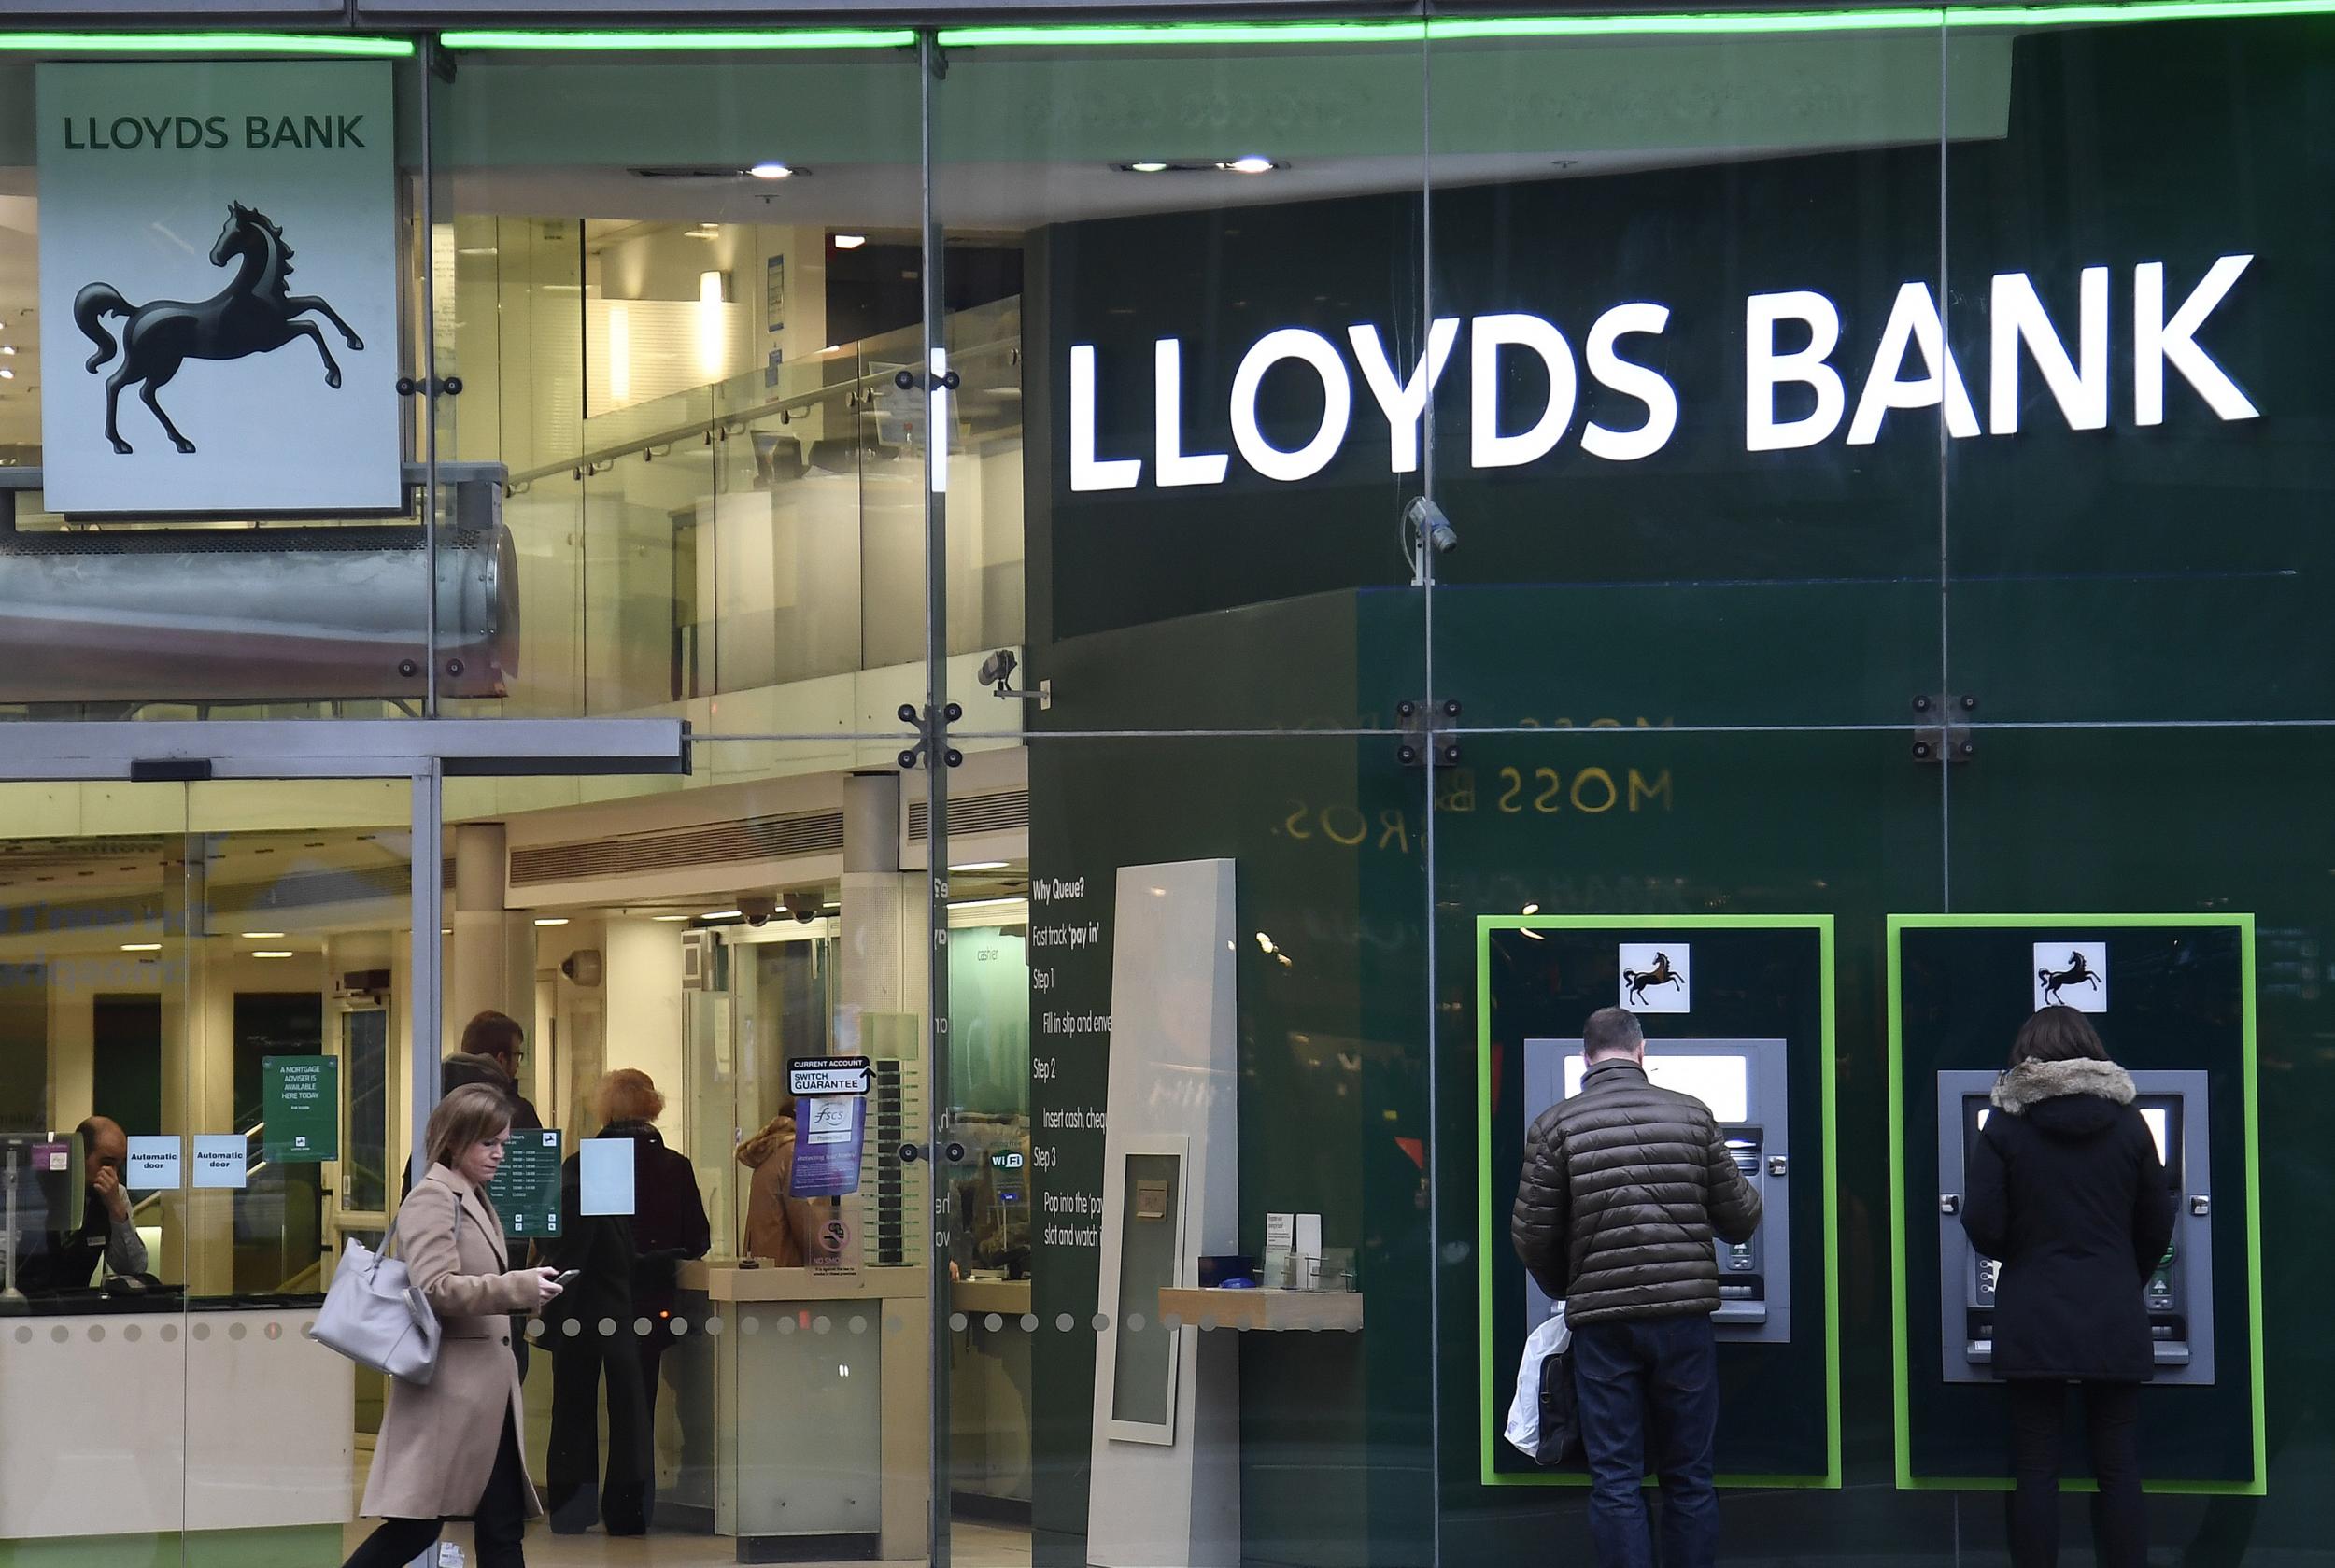 The banking industry is being urged to follow Lloyds' lead and cut unauthorised overdraft charges